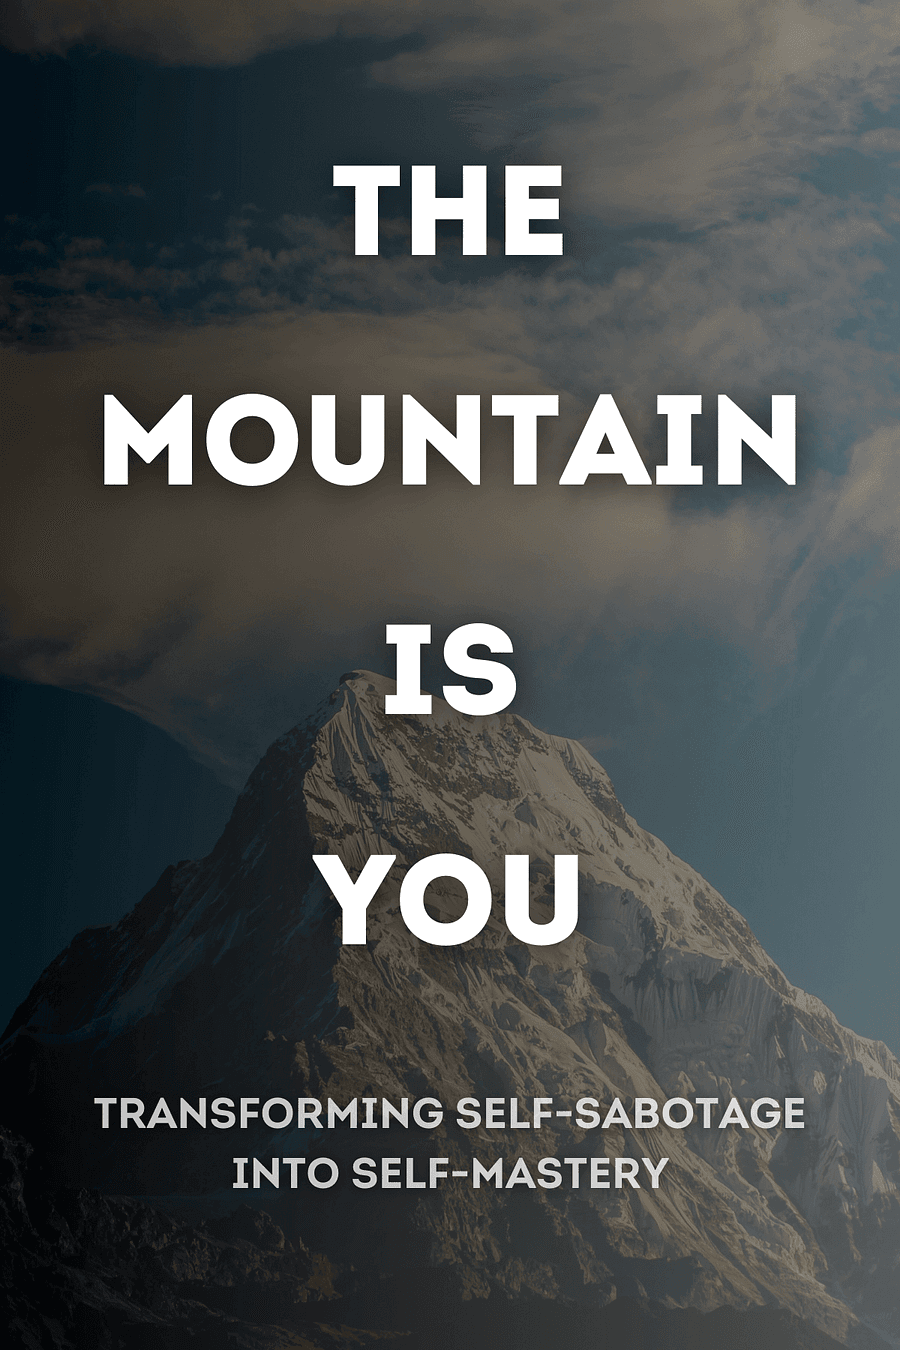 The Mountain Is You by Brianna Wiest - Book Summary